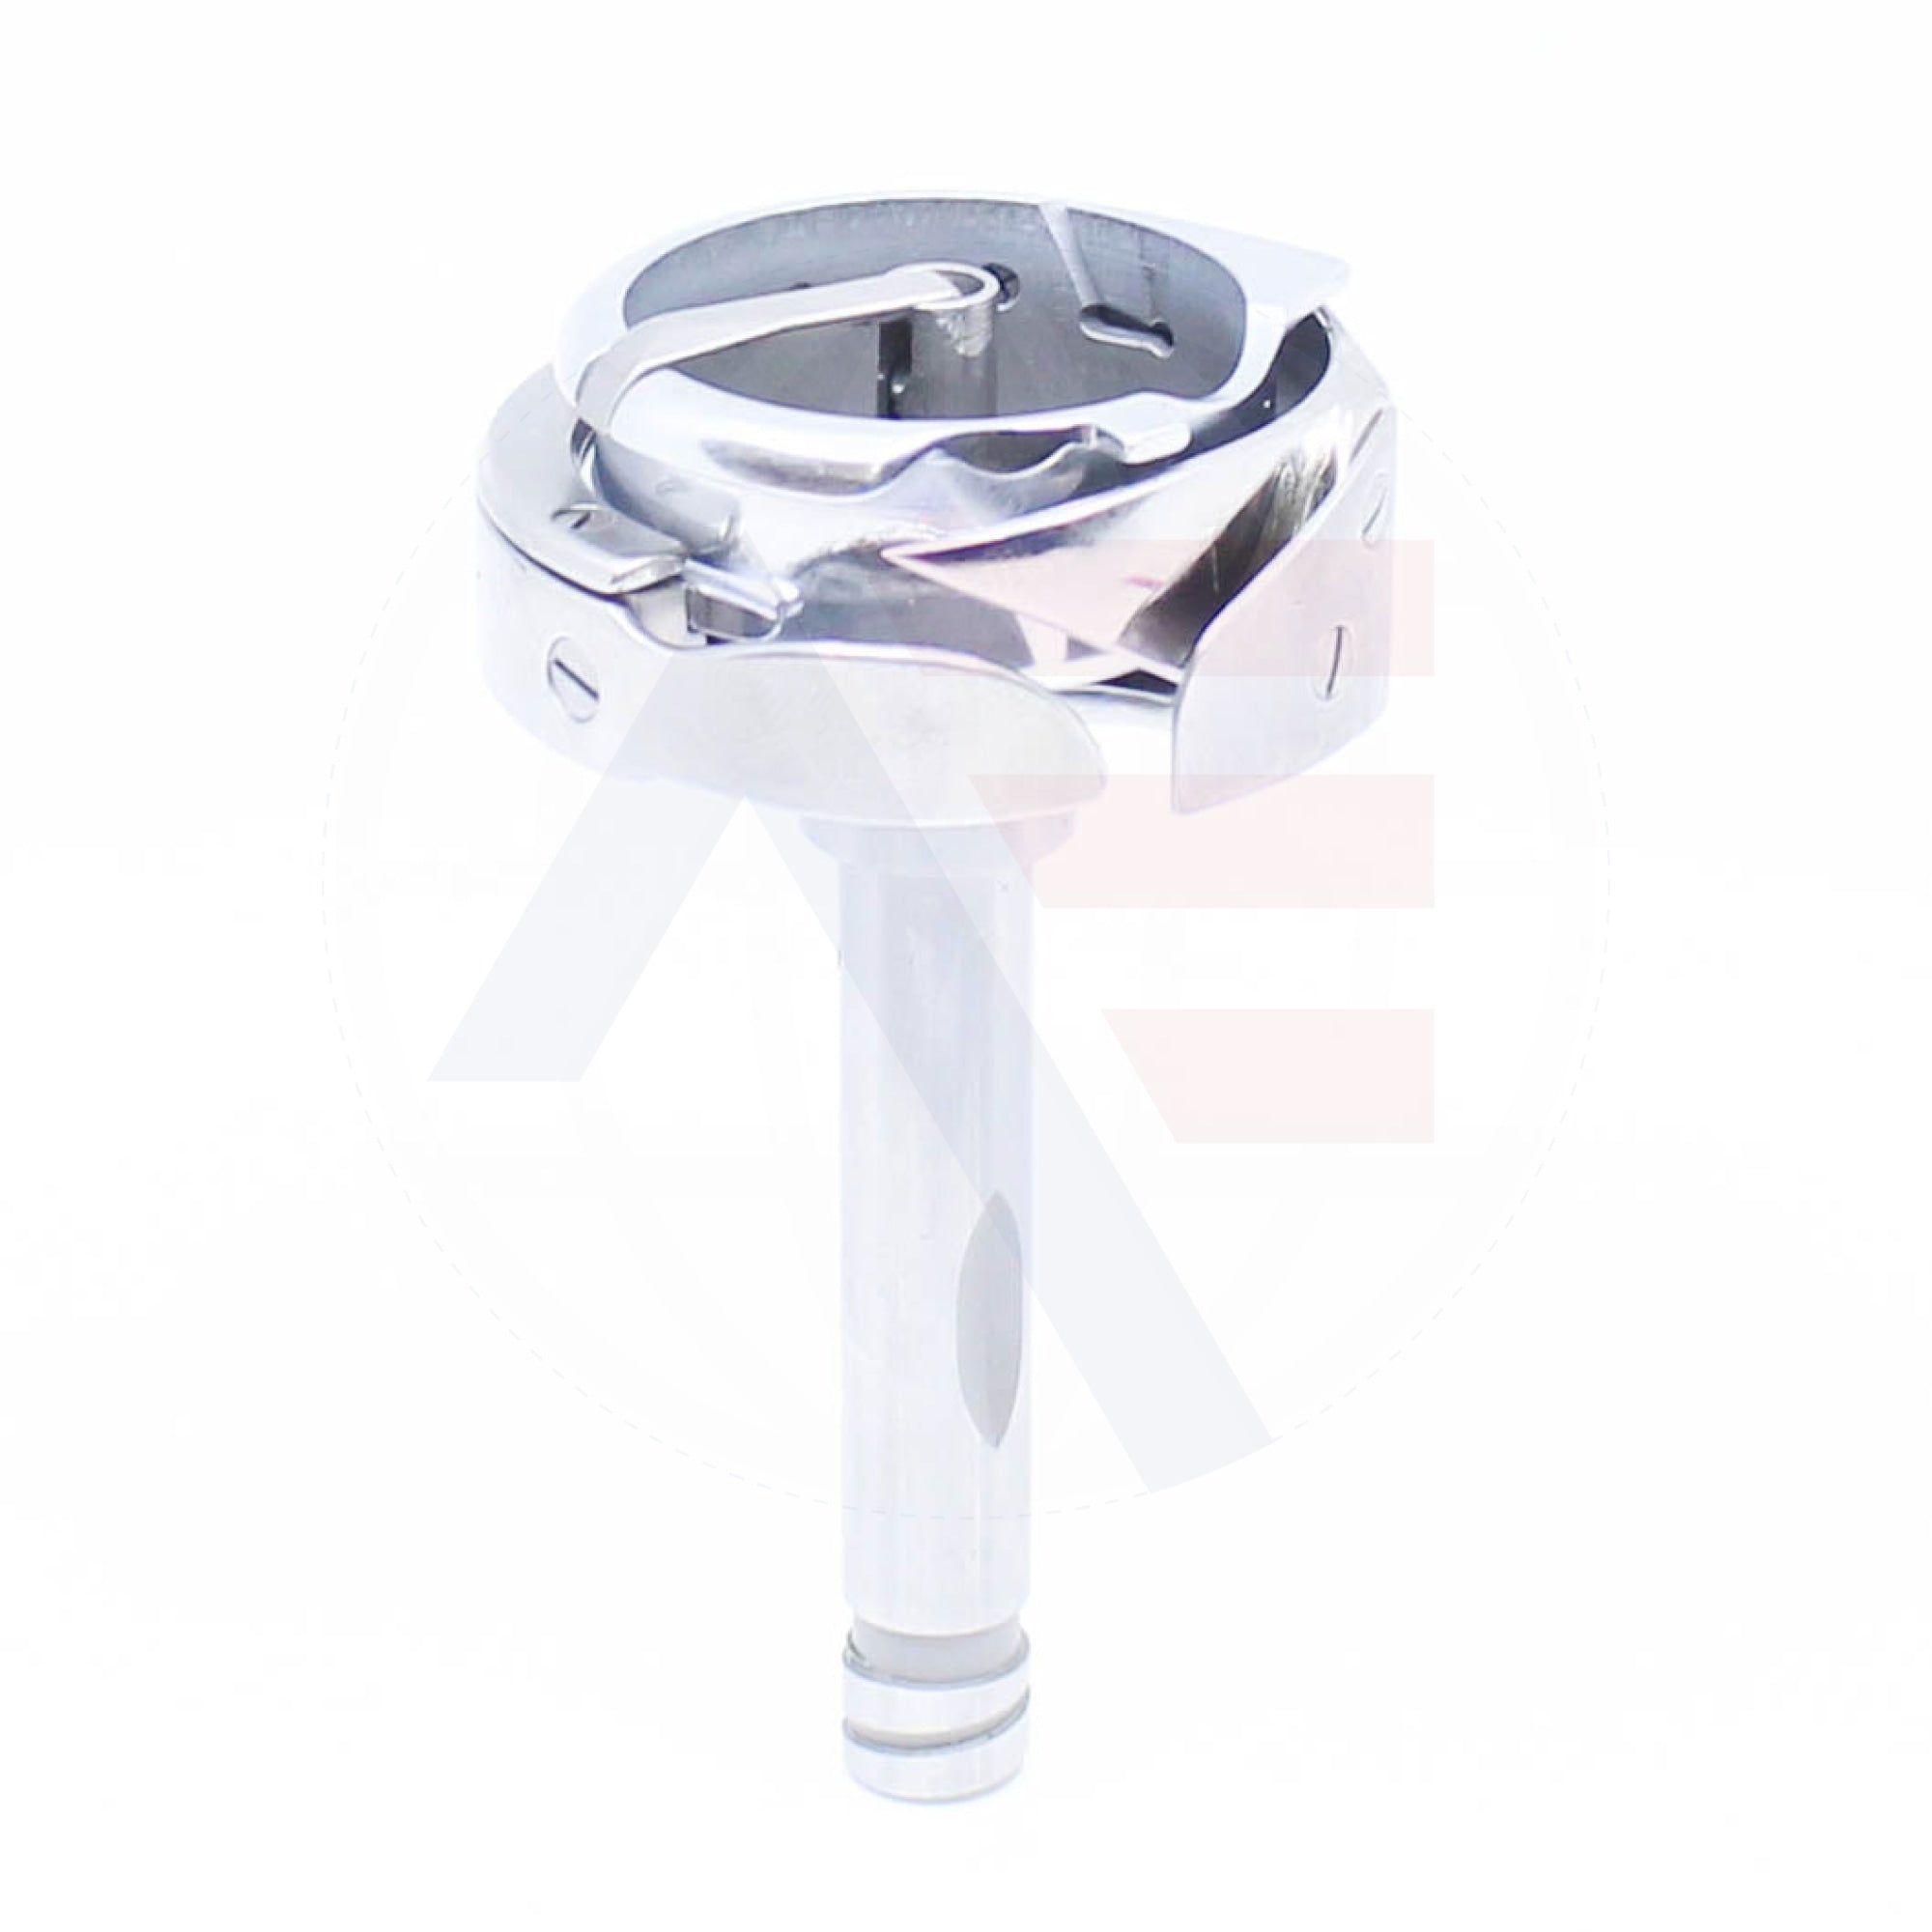 Hsh1215Mm(5) Hook And Base Sewing Machine Spare Parts